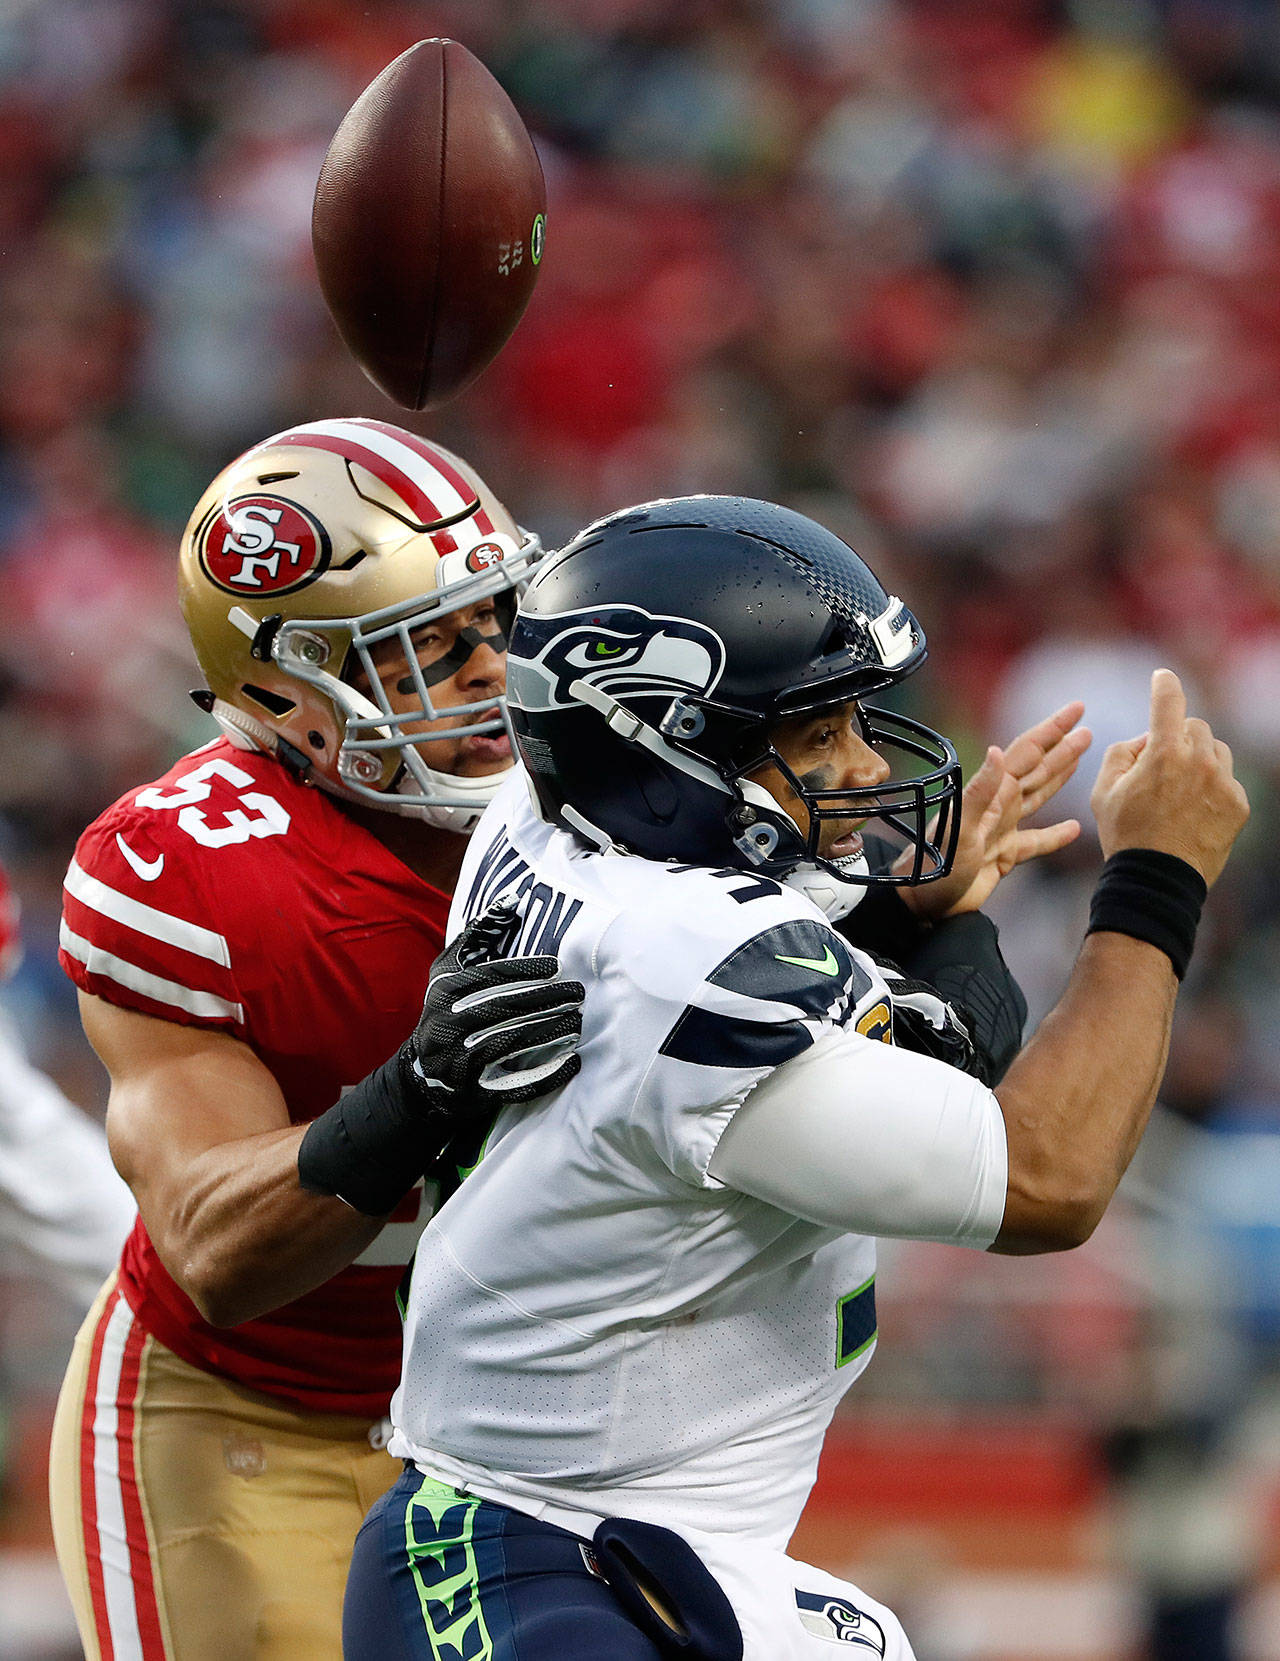 What The 49ers Said Following Their 26-23 Loss To The Seahawks